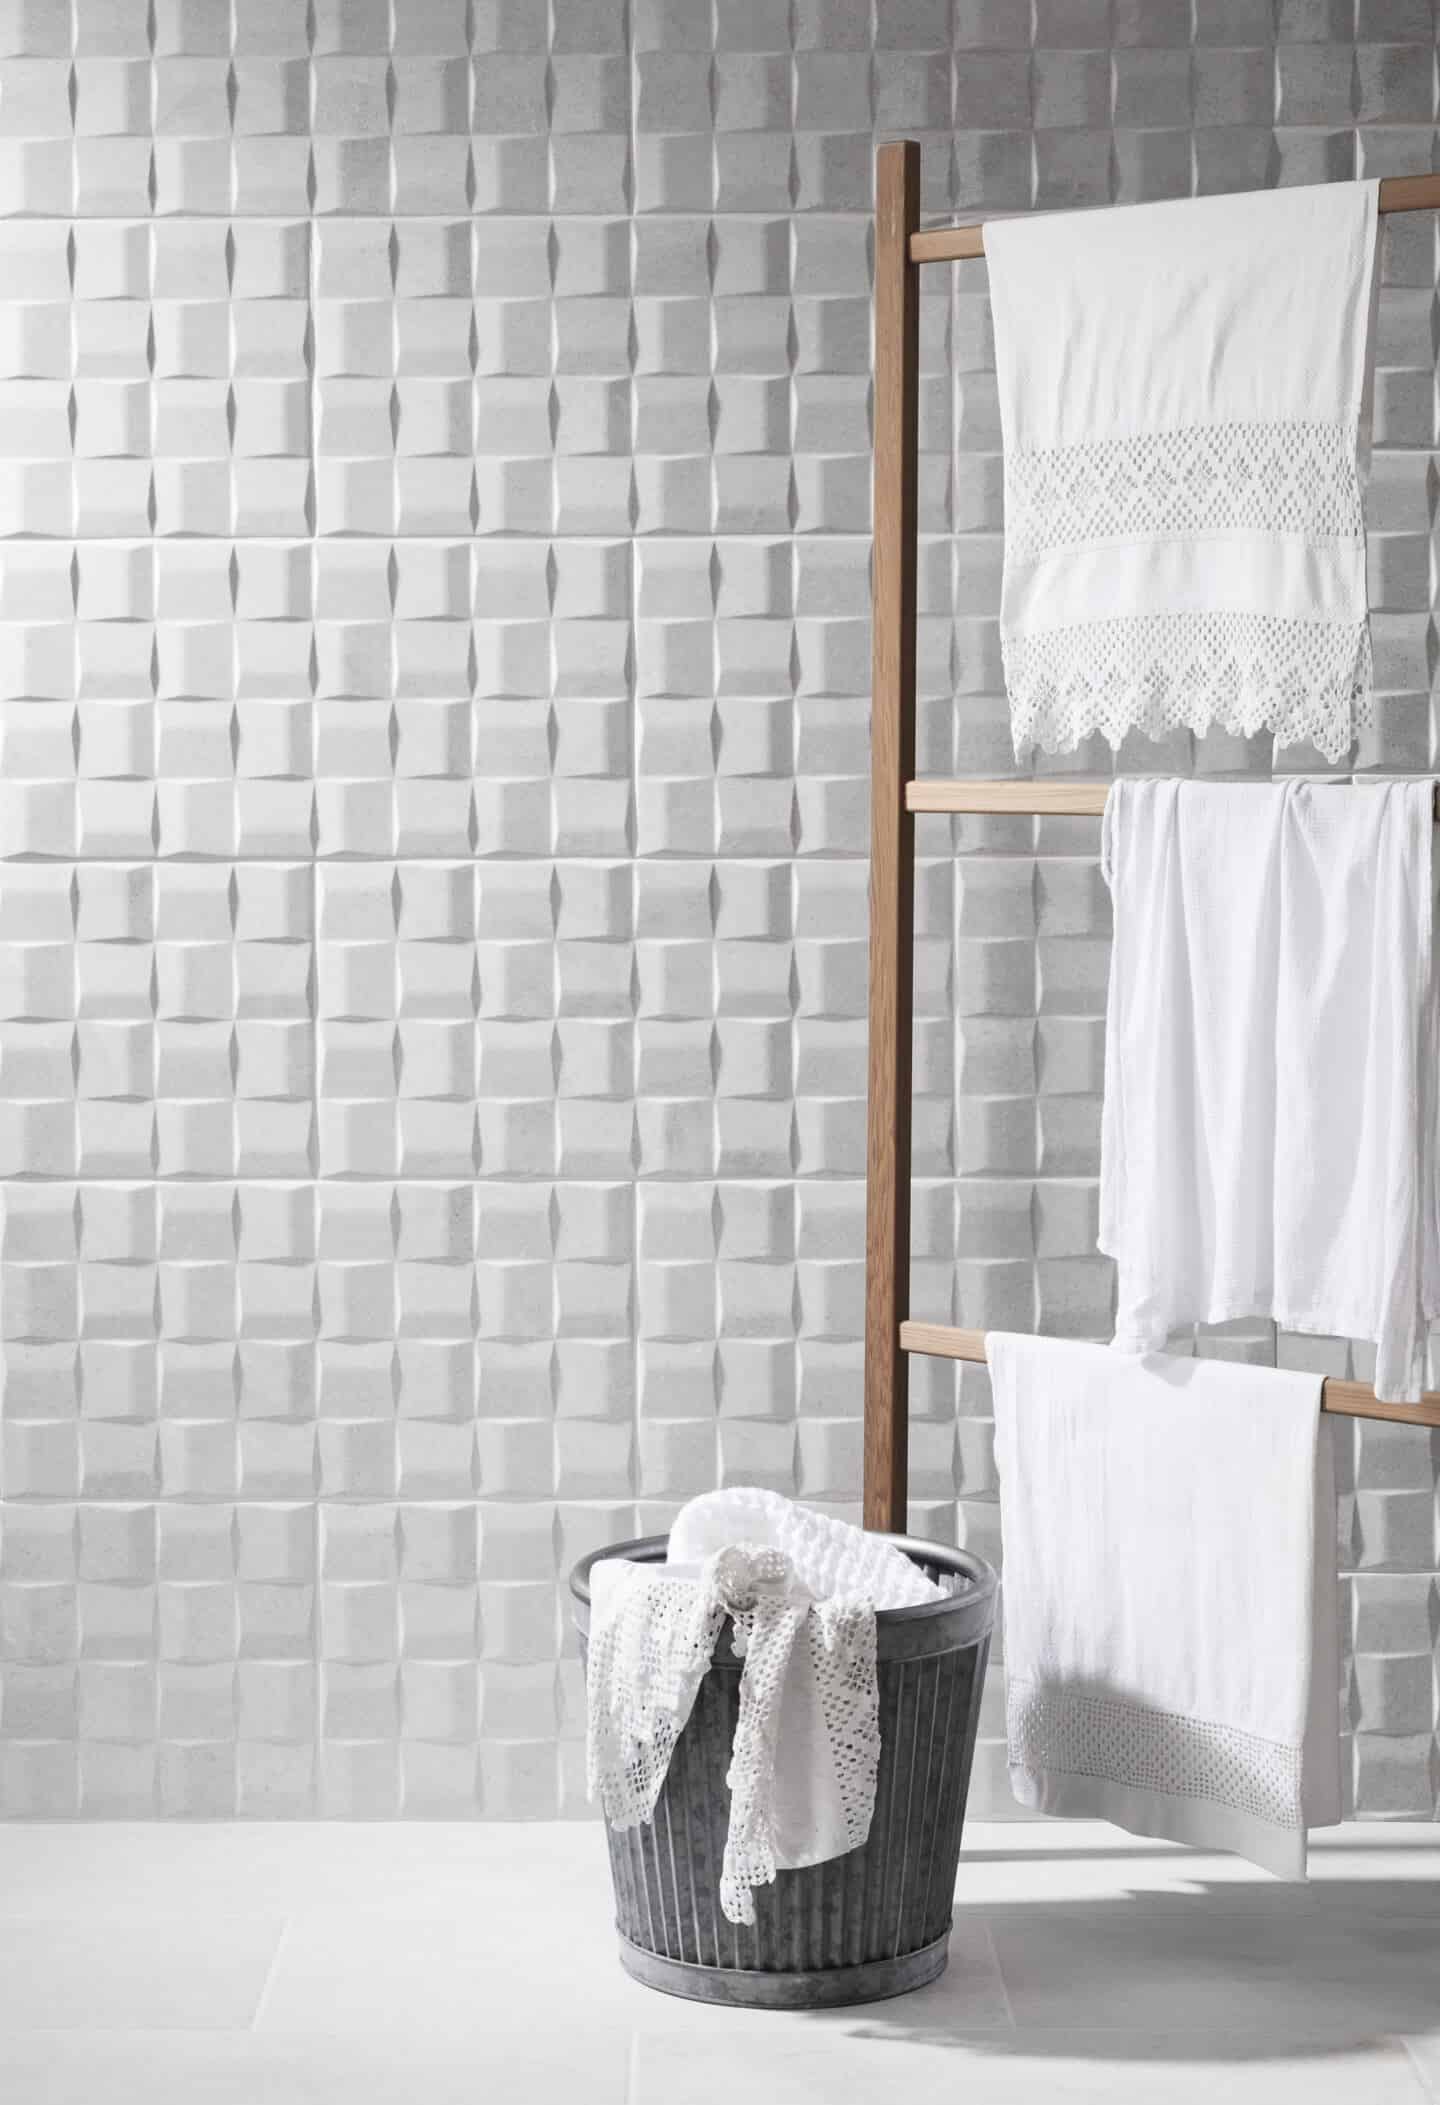 Textured walls featuring Polesden Art White Tile from CTD Tiles seen with a clothes dryer and laundry basket